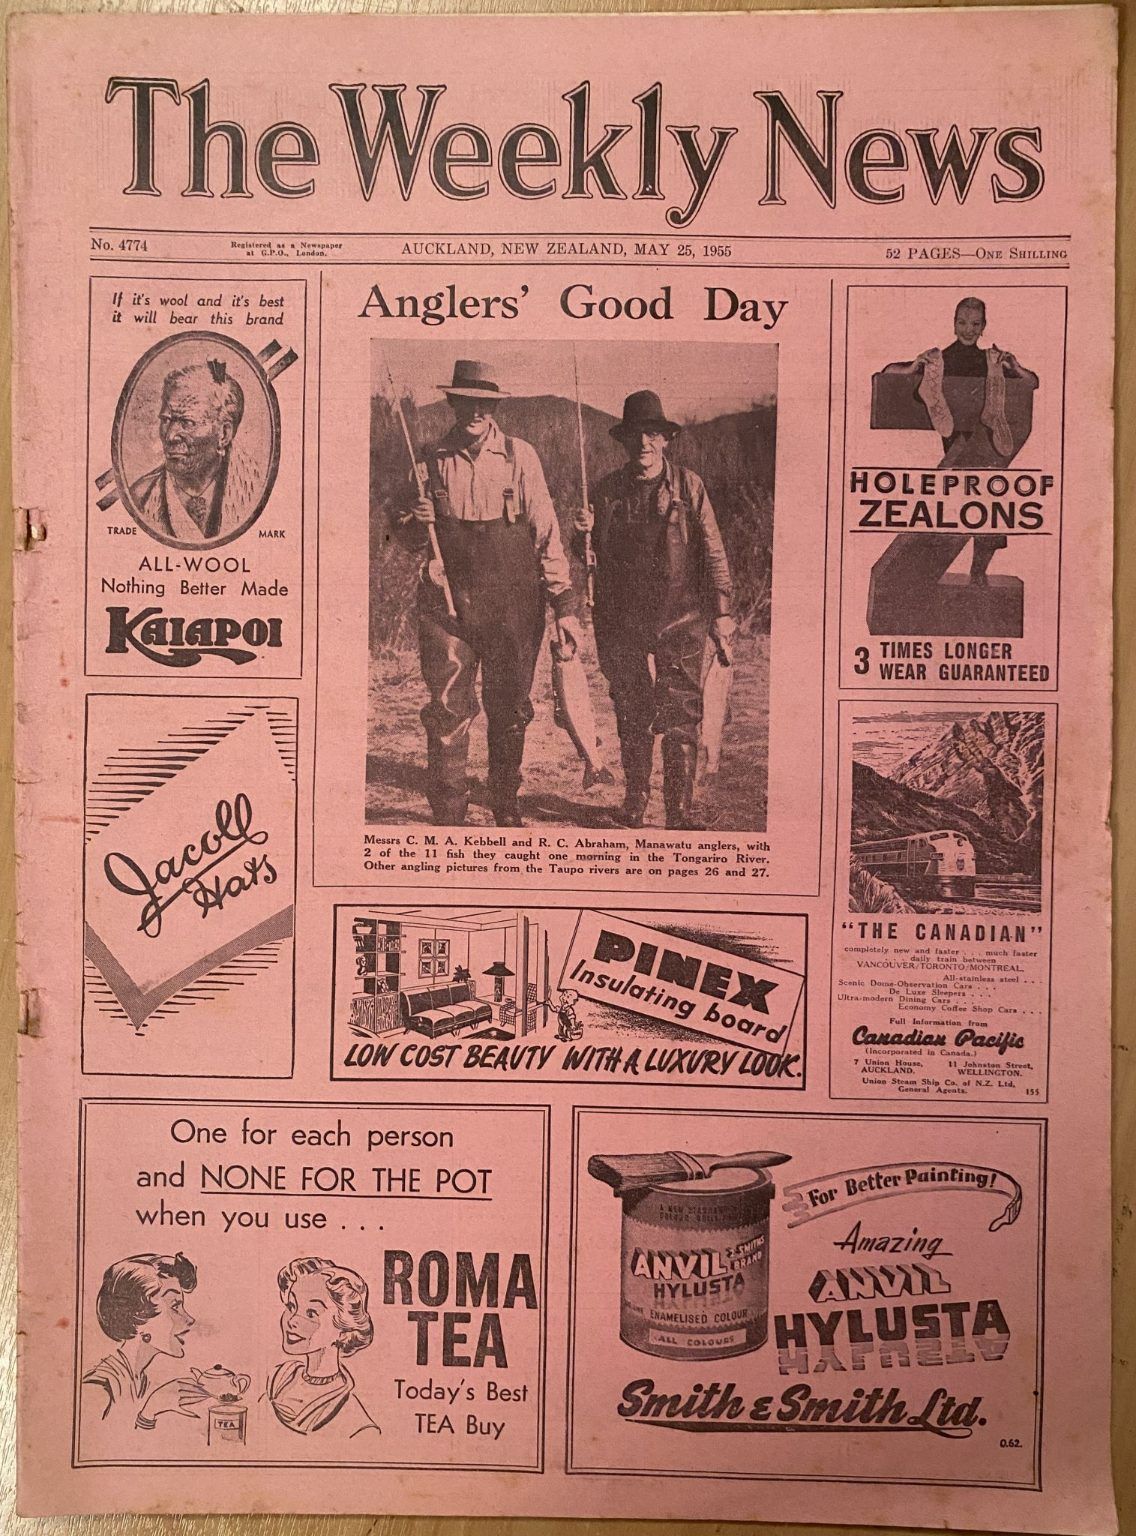 OLD NEWSPAPER: The Weekly News - No. 4774, 25 May 1955